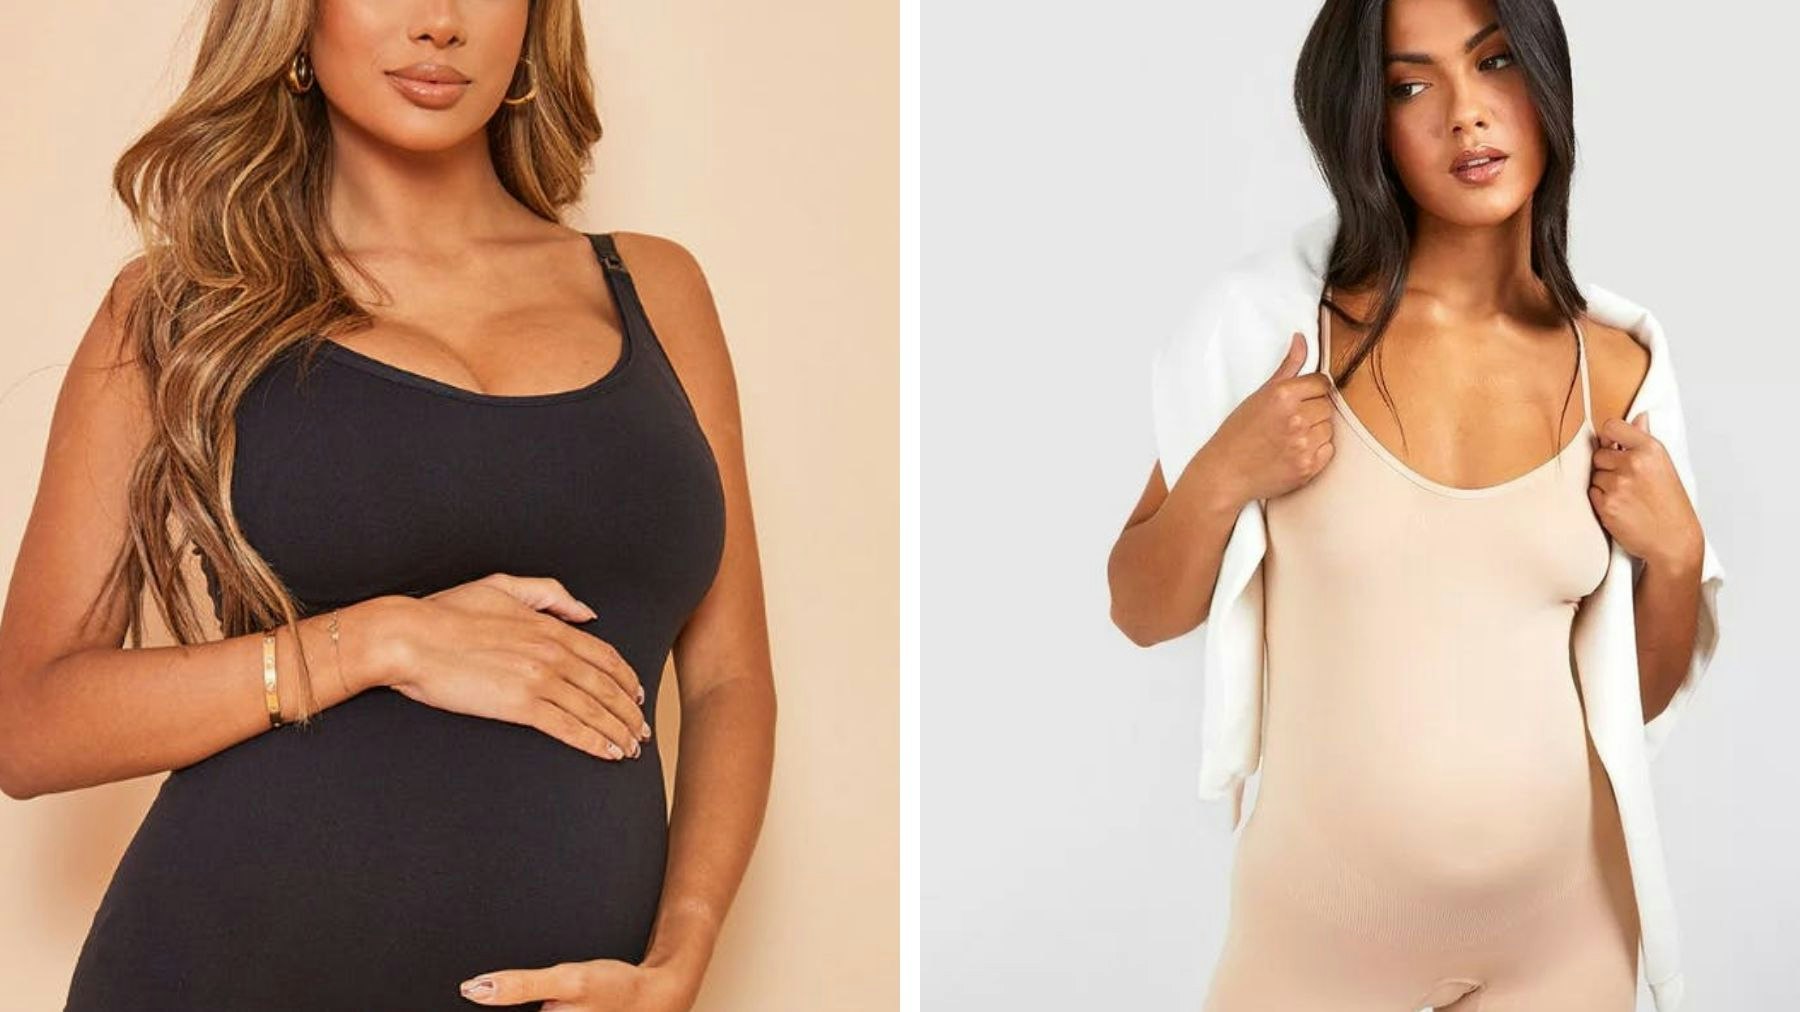 Can You Wear Shapewear While Pregnant?